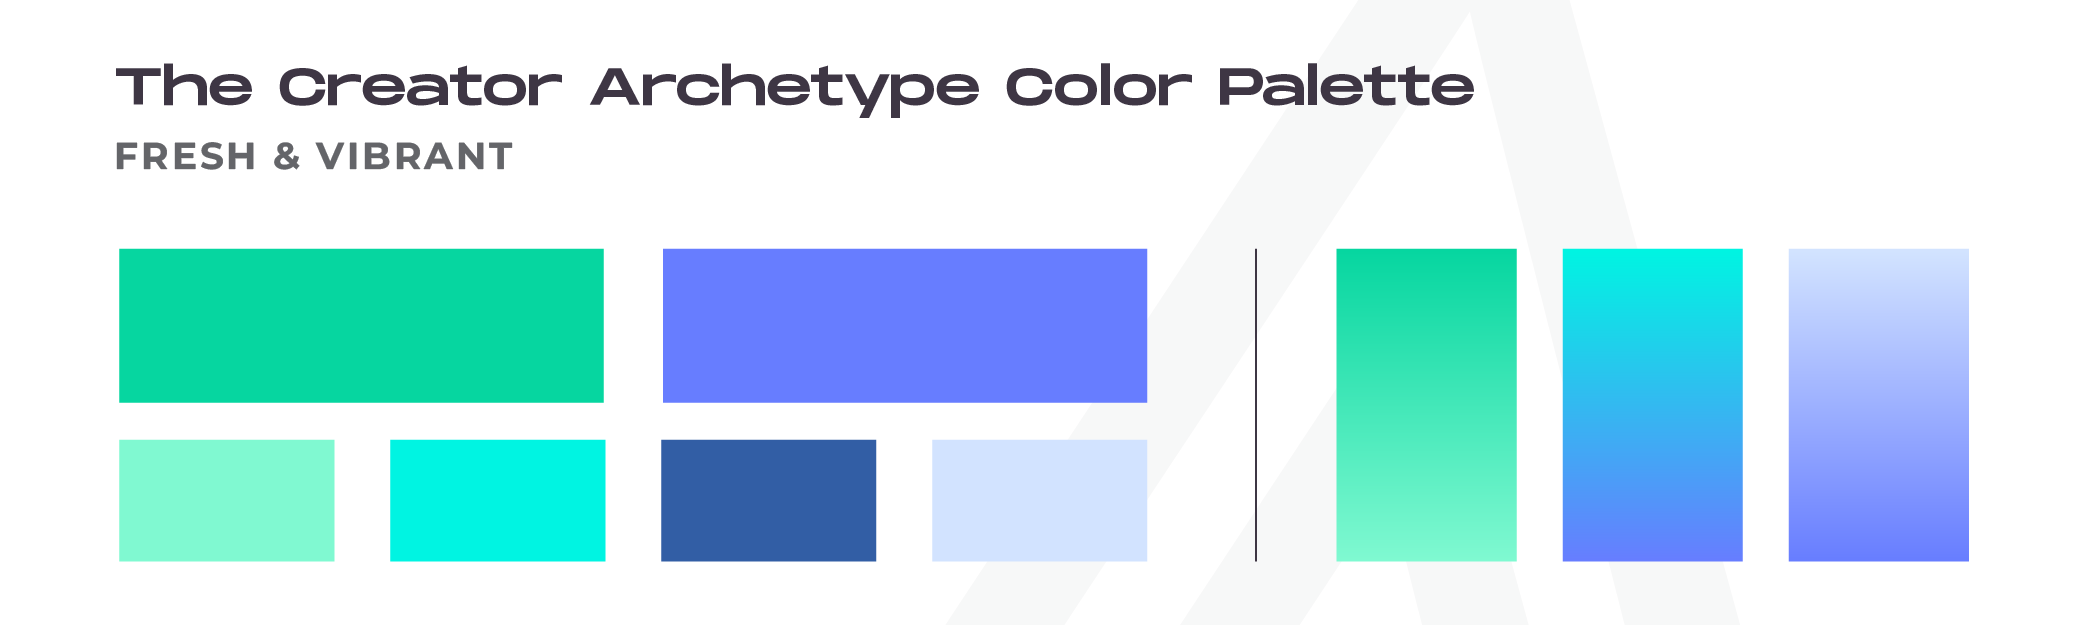 Brand Archetypes Color Palettes_The Creator